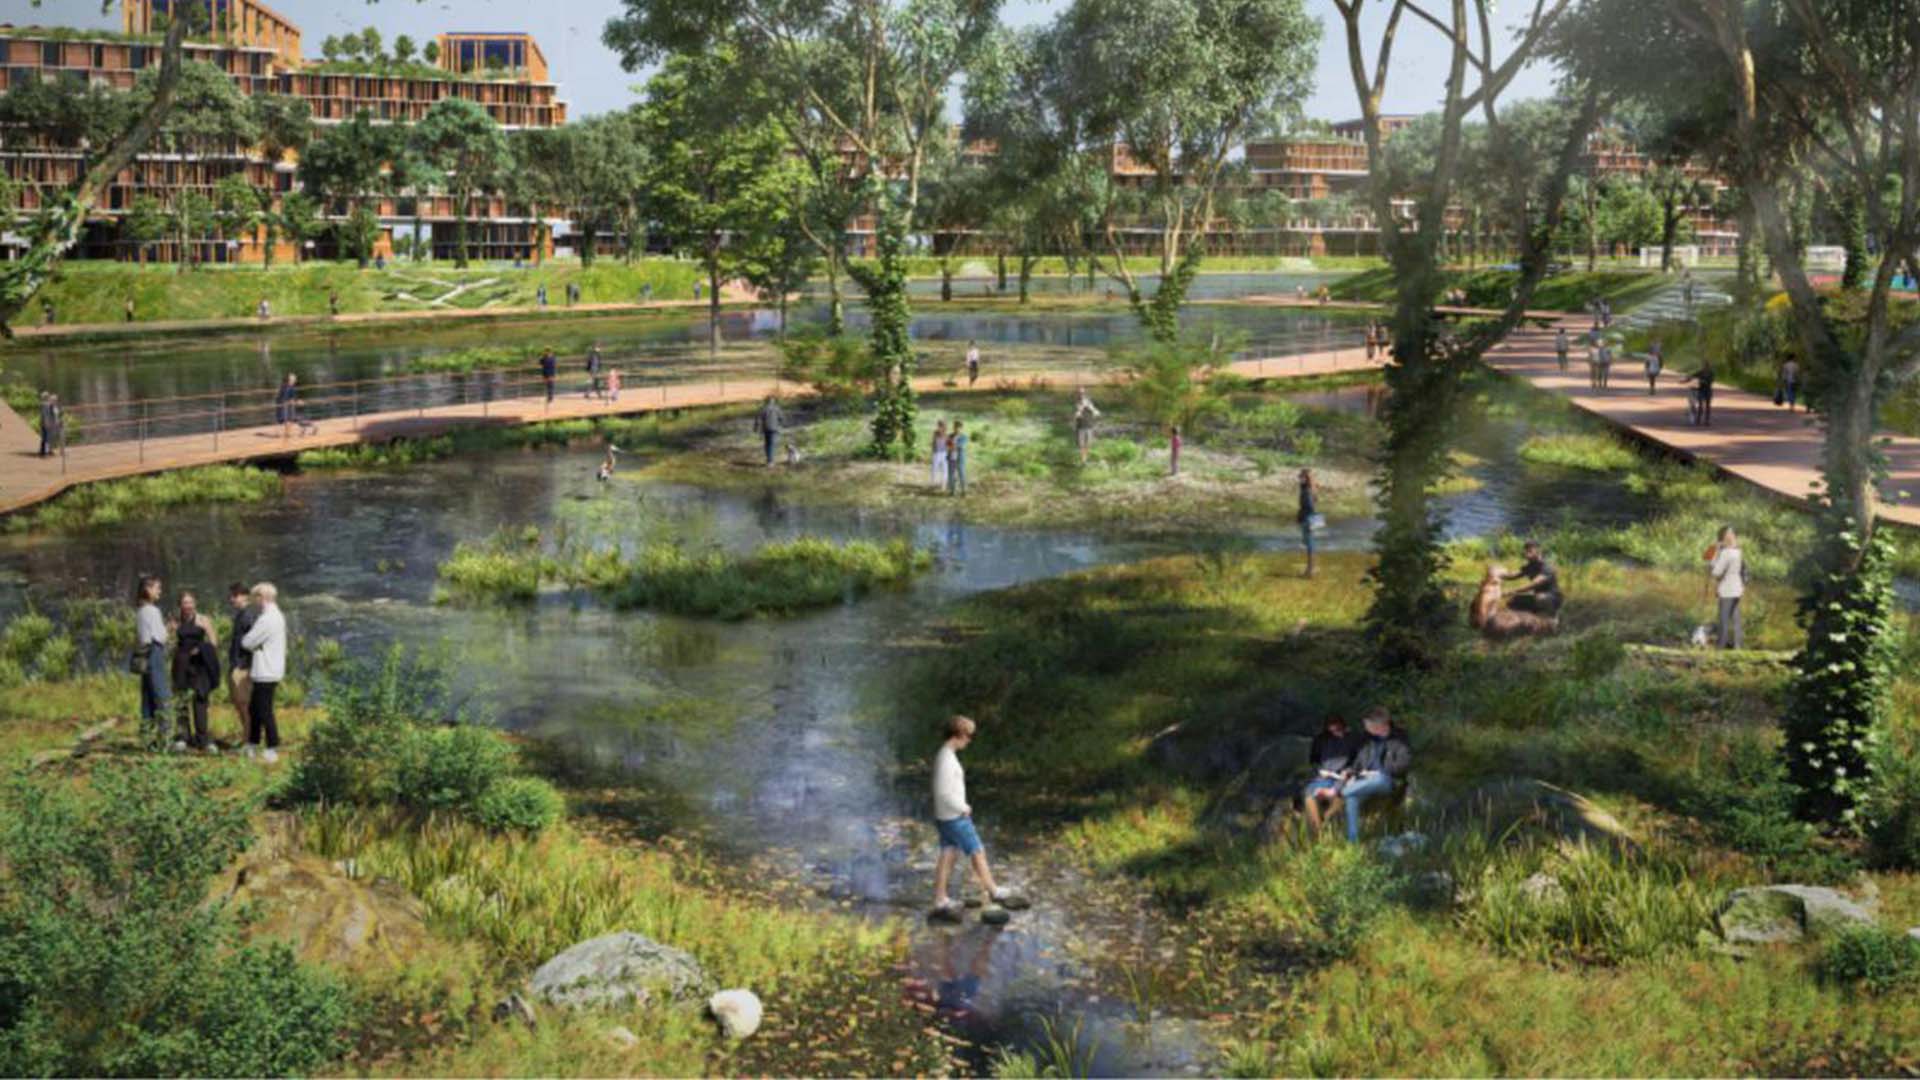 Artist rendering of THE PARKS, Africa's most sustainable city